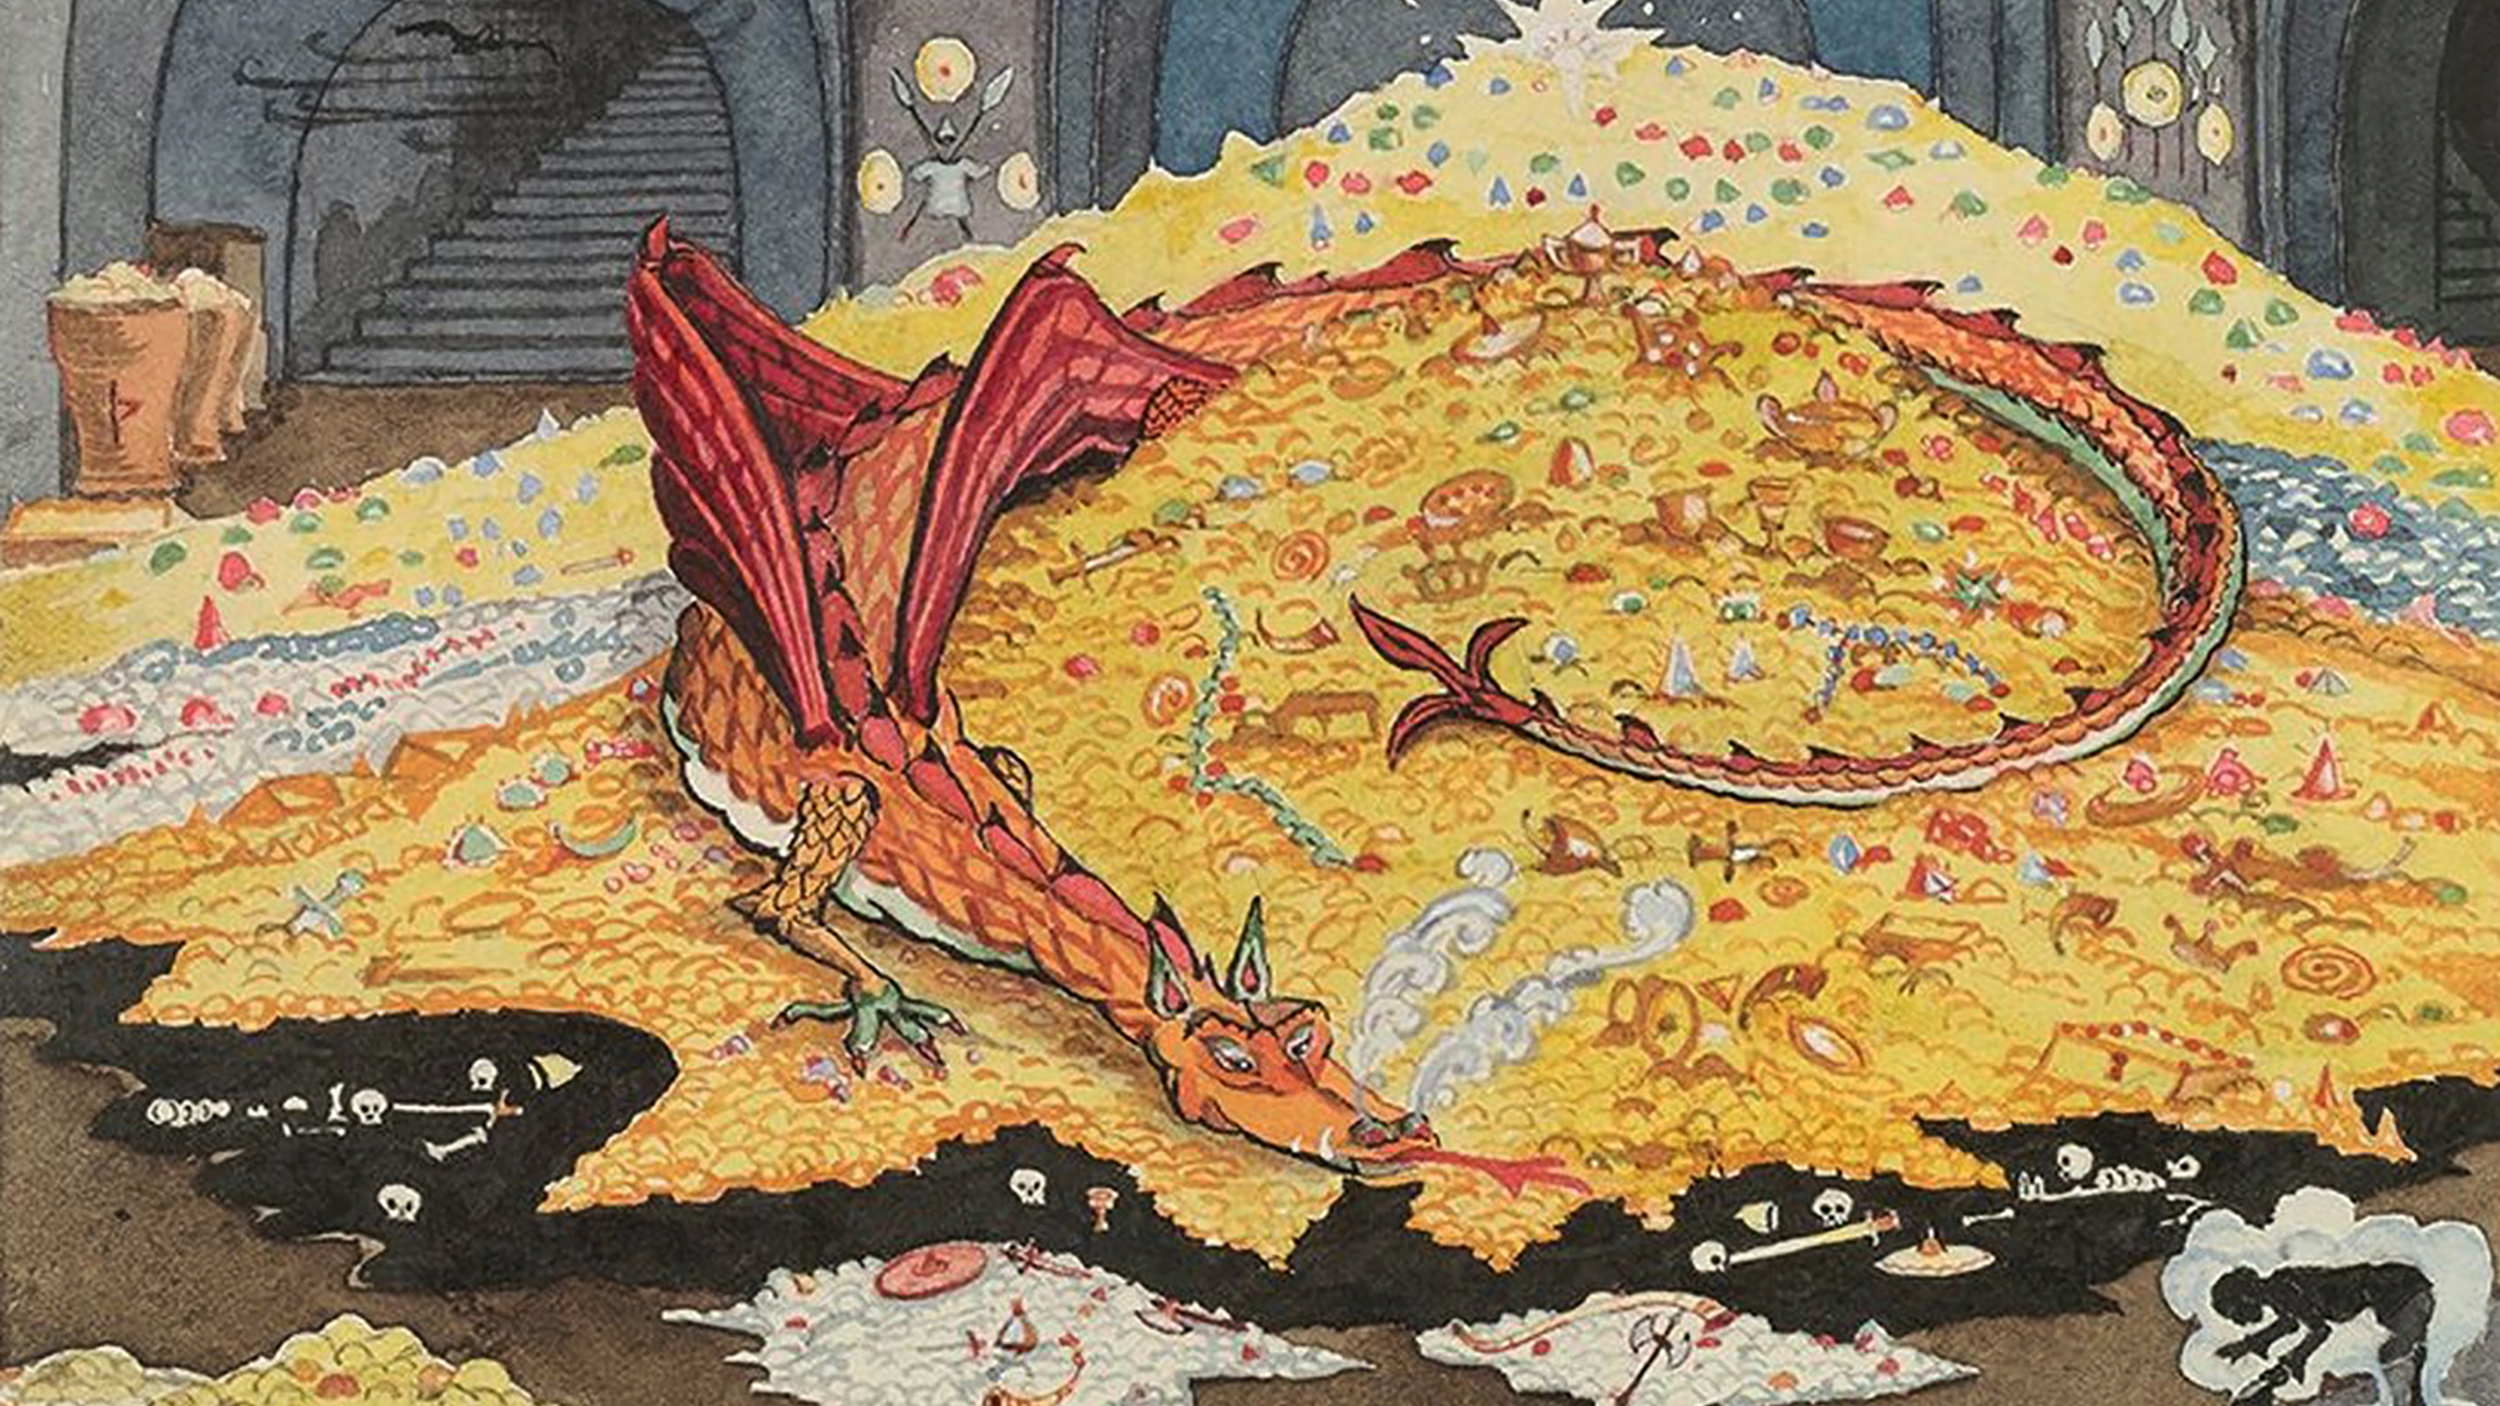 A drawing of a dragon on a pile of gold.